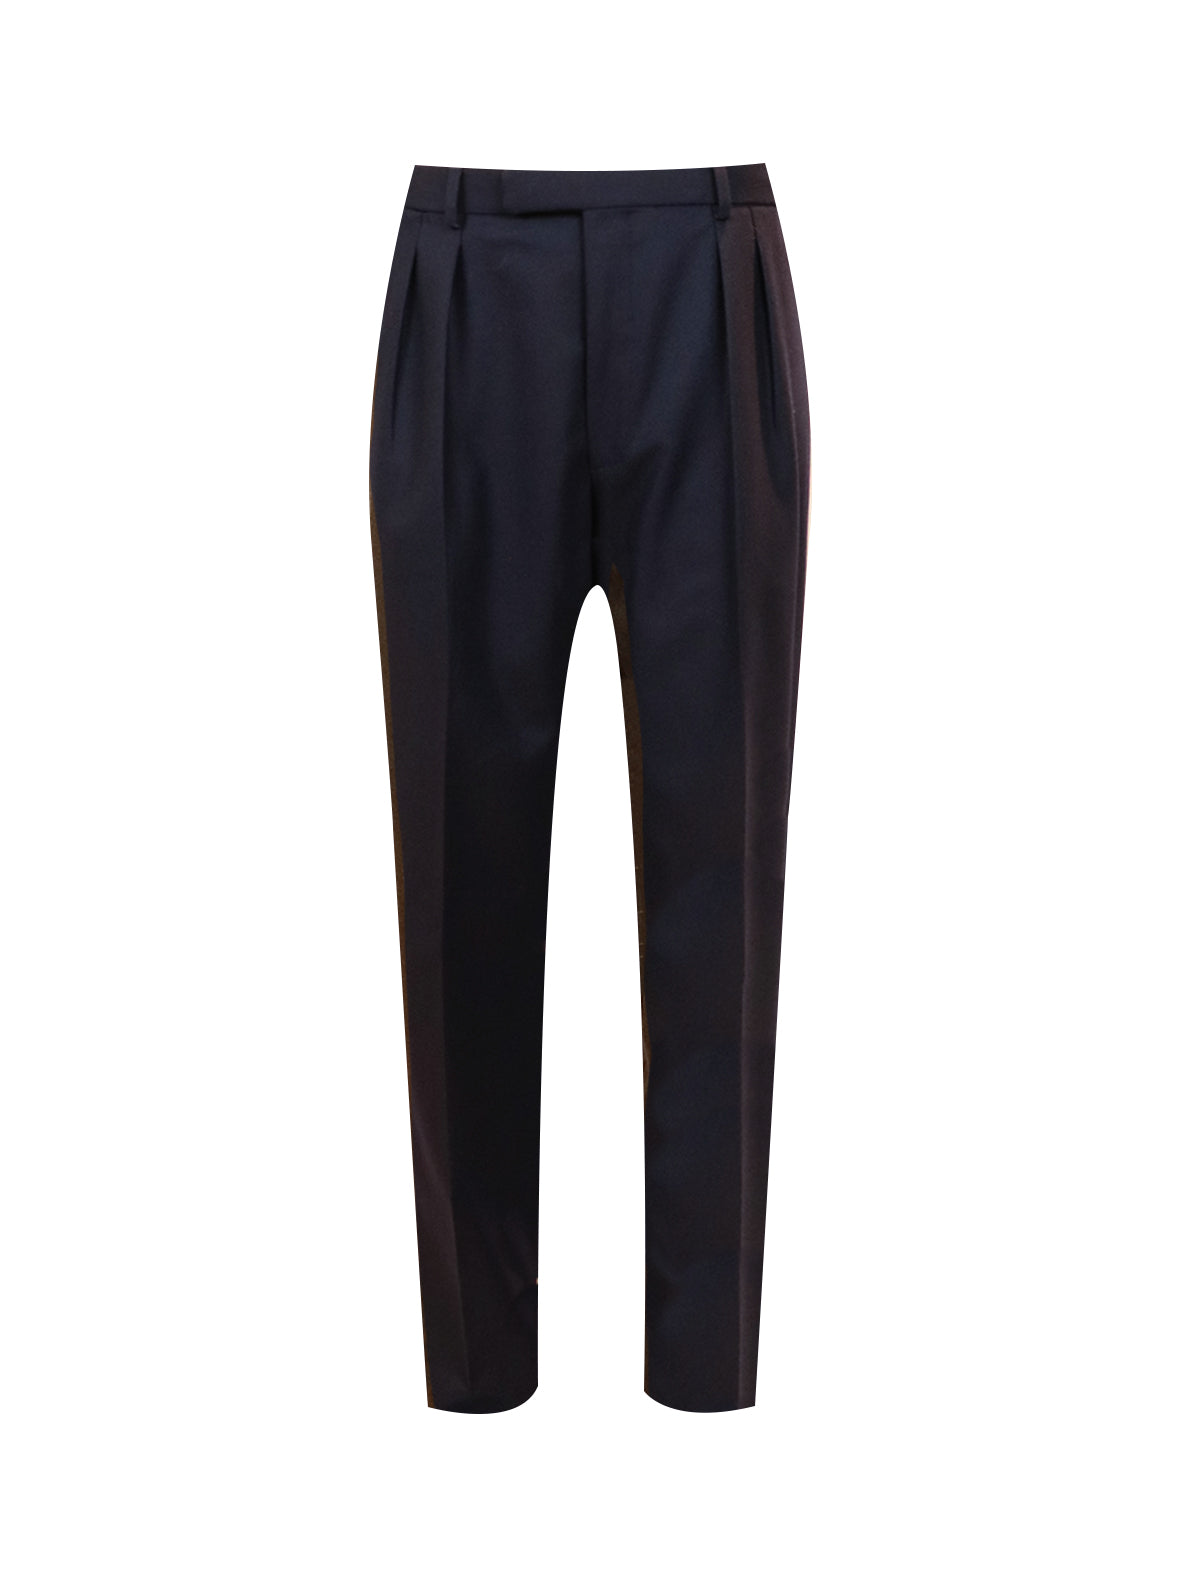 GABRIELE PASINI Pleated Tailored Pant in Navy